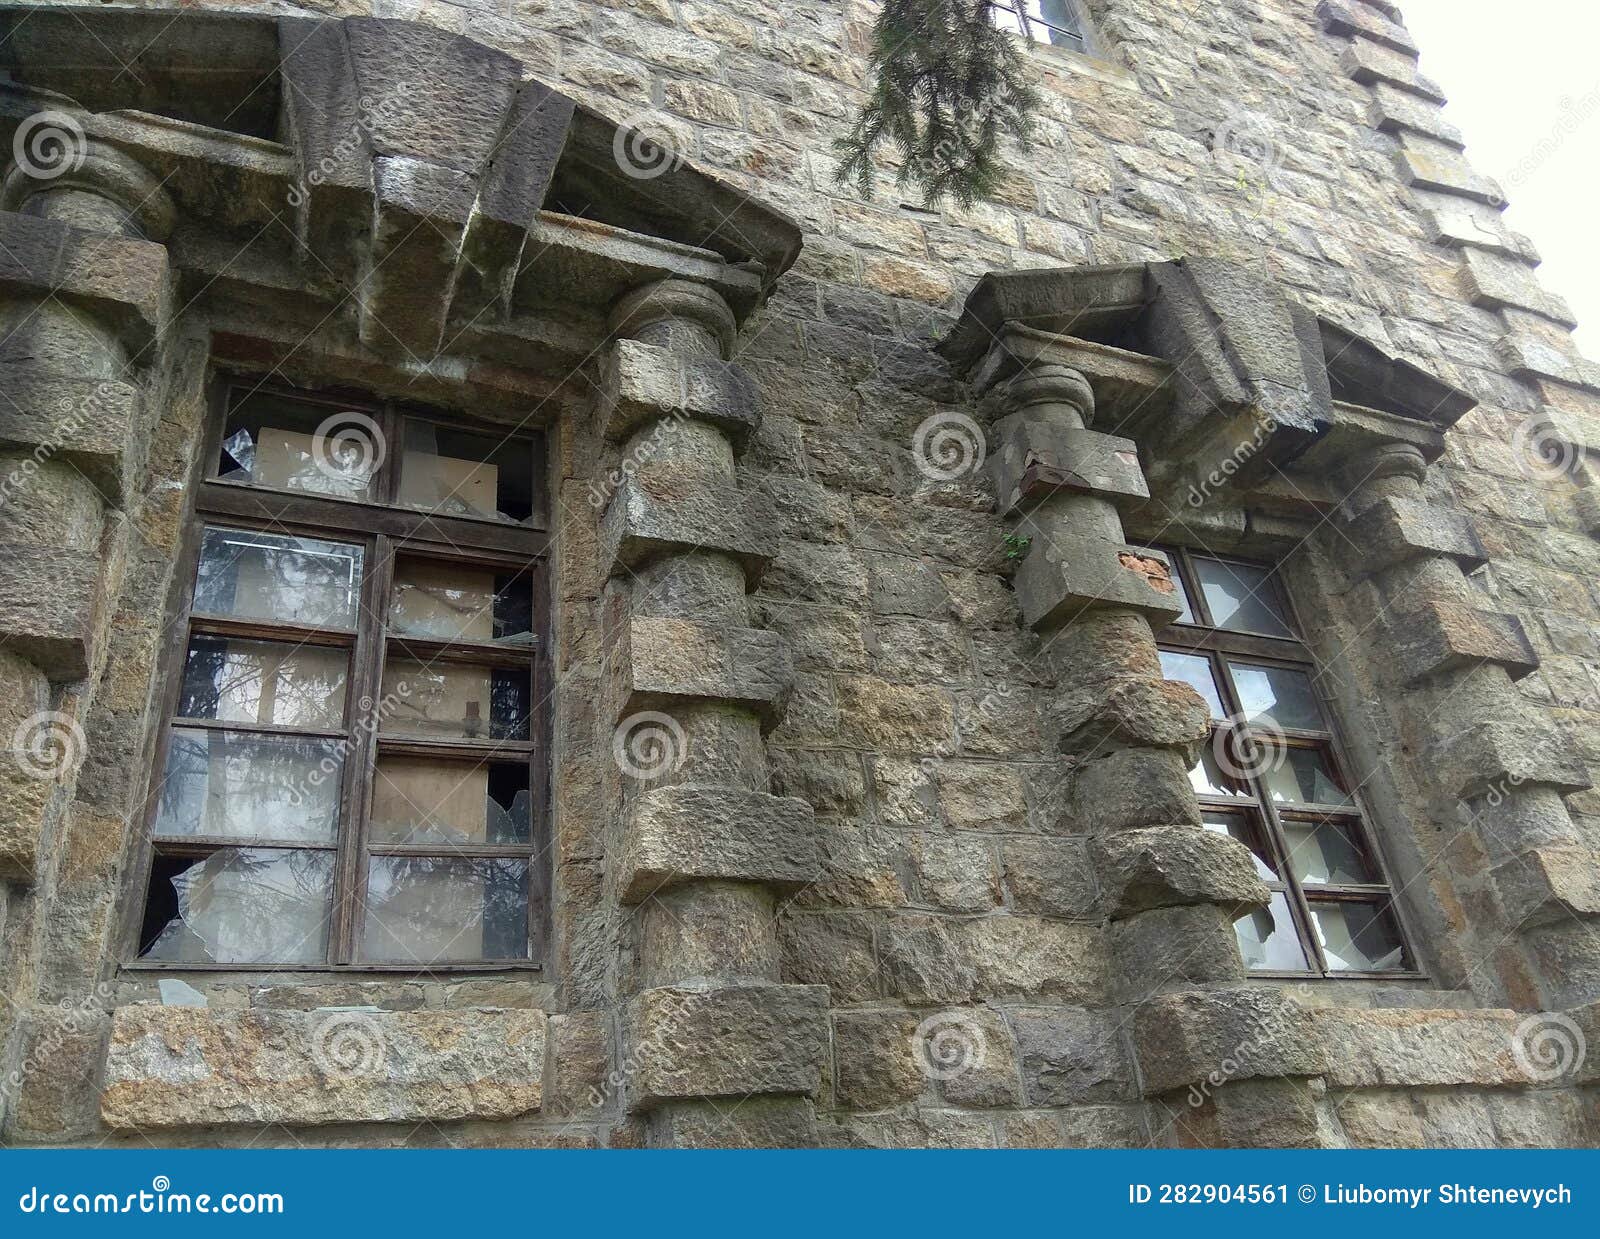 ukraine, khmilnyk, the palace of count xido, the windows of the palace on the river side